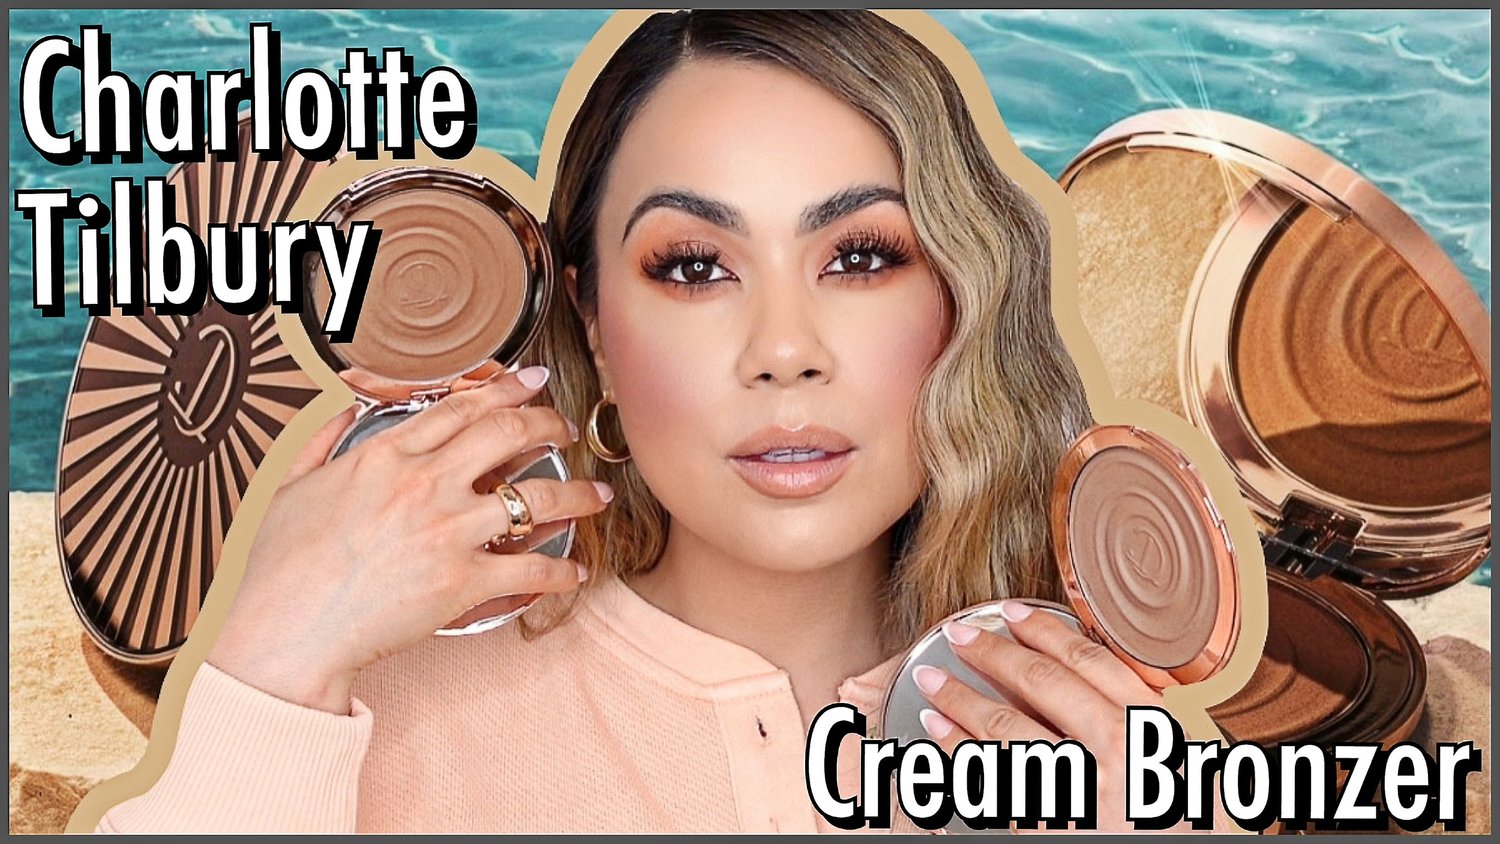 Charlotte Tilbury Beautiful Skin Sun kissed Glow Cream Bronzer Review -  Blog - Katching up with kitty